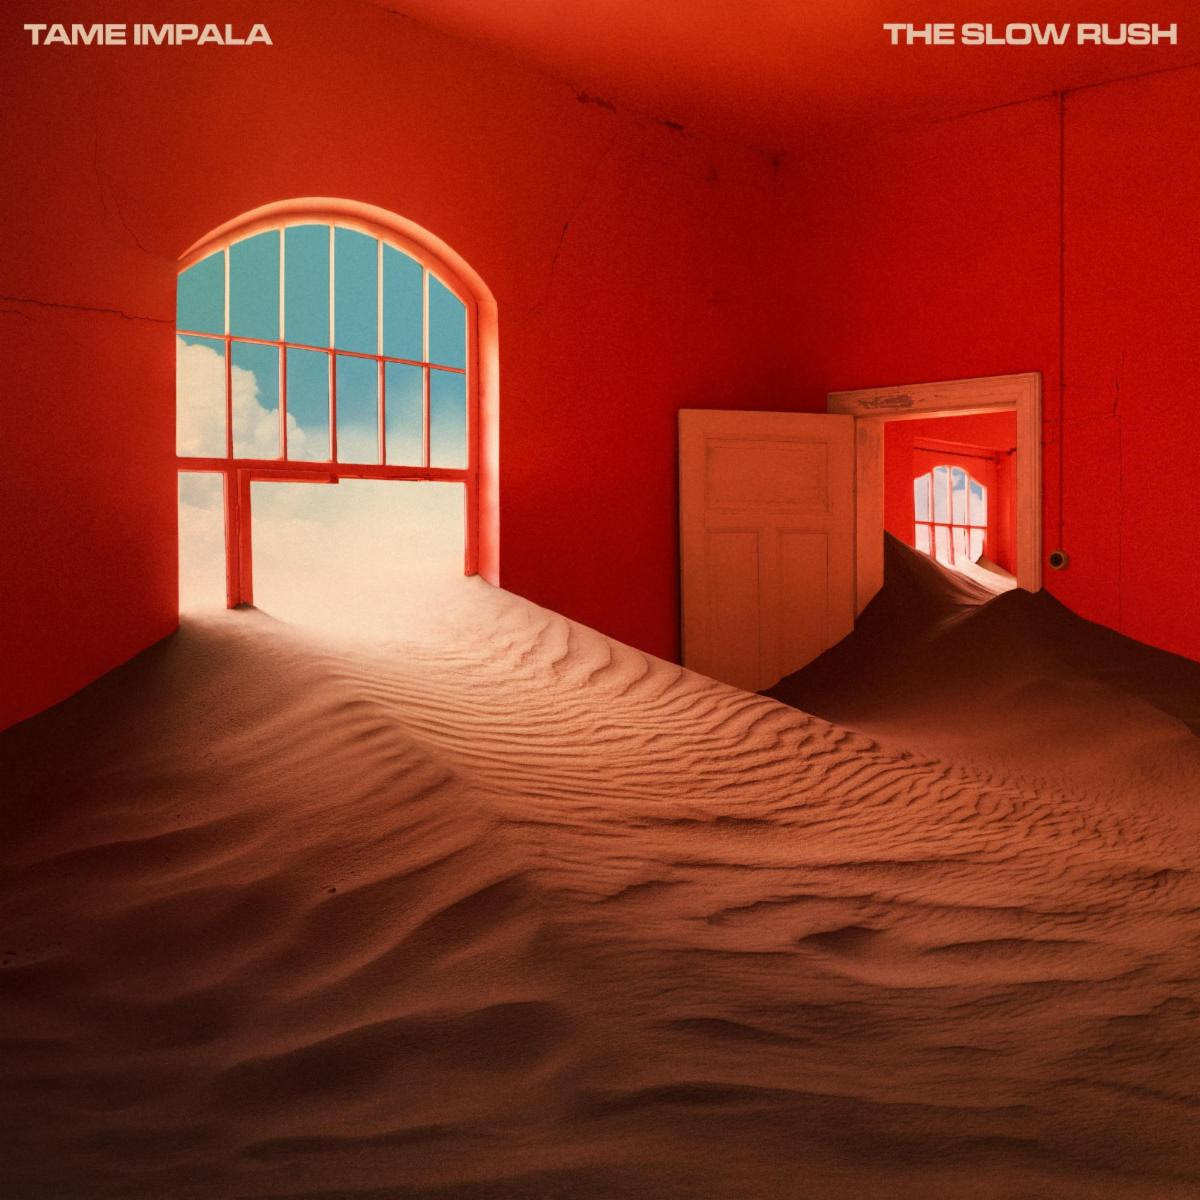 Northern Transmissions review of The Slow Rush by Tame Impala